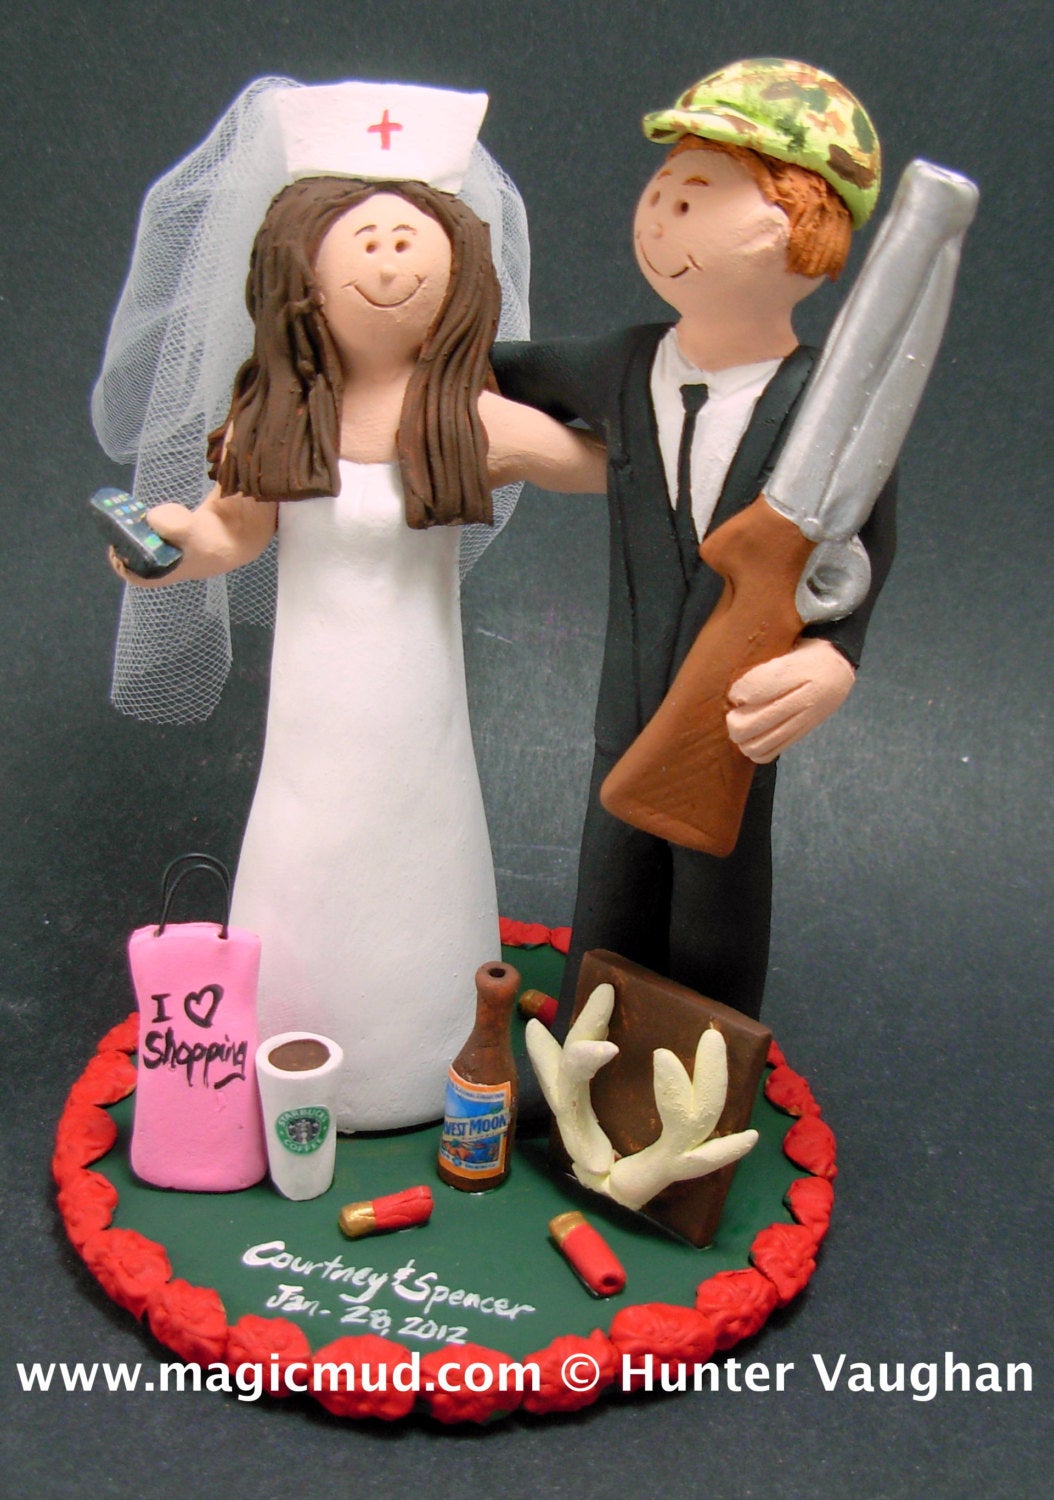 Bride with Iphone Wedding Cake Topper, Hunters Wedding Cake Topper, Redneck Wedding CakeTopper, Nurse Wedding CakeTopper, Iphone Cake topper - iWeddingCakeToppers